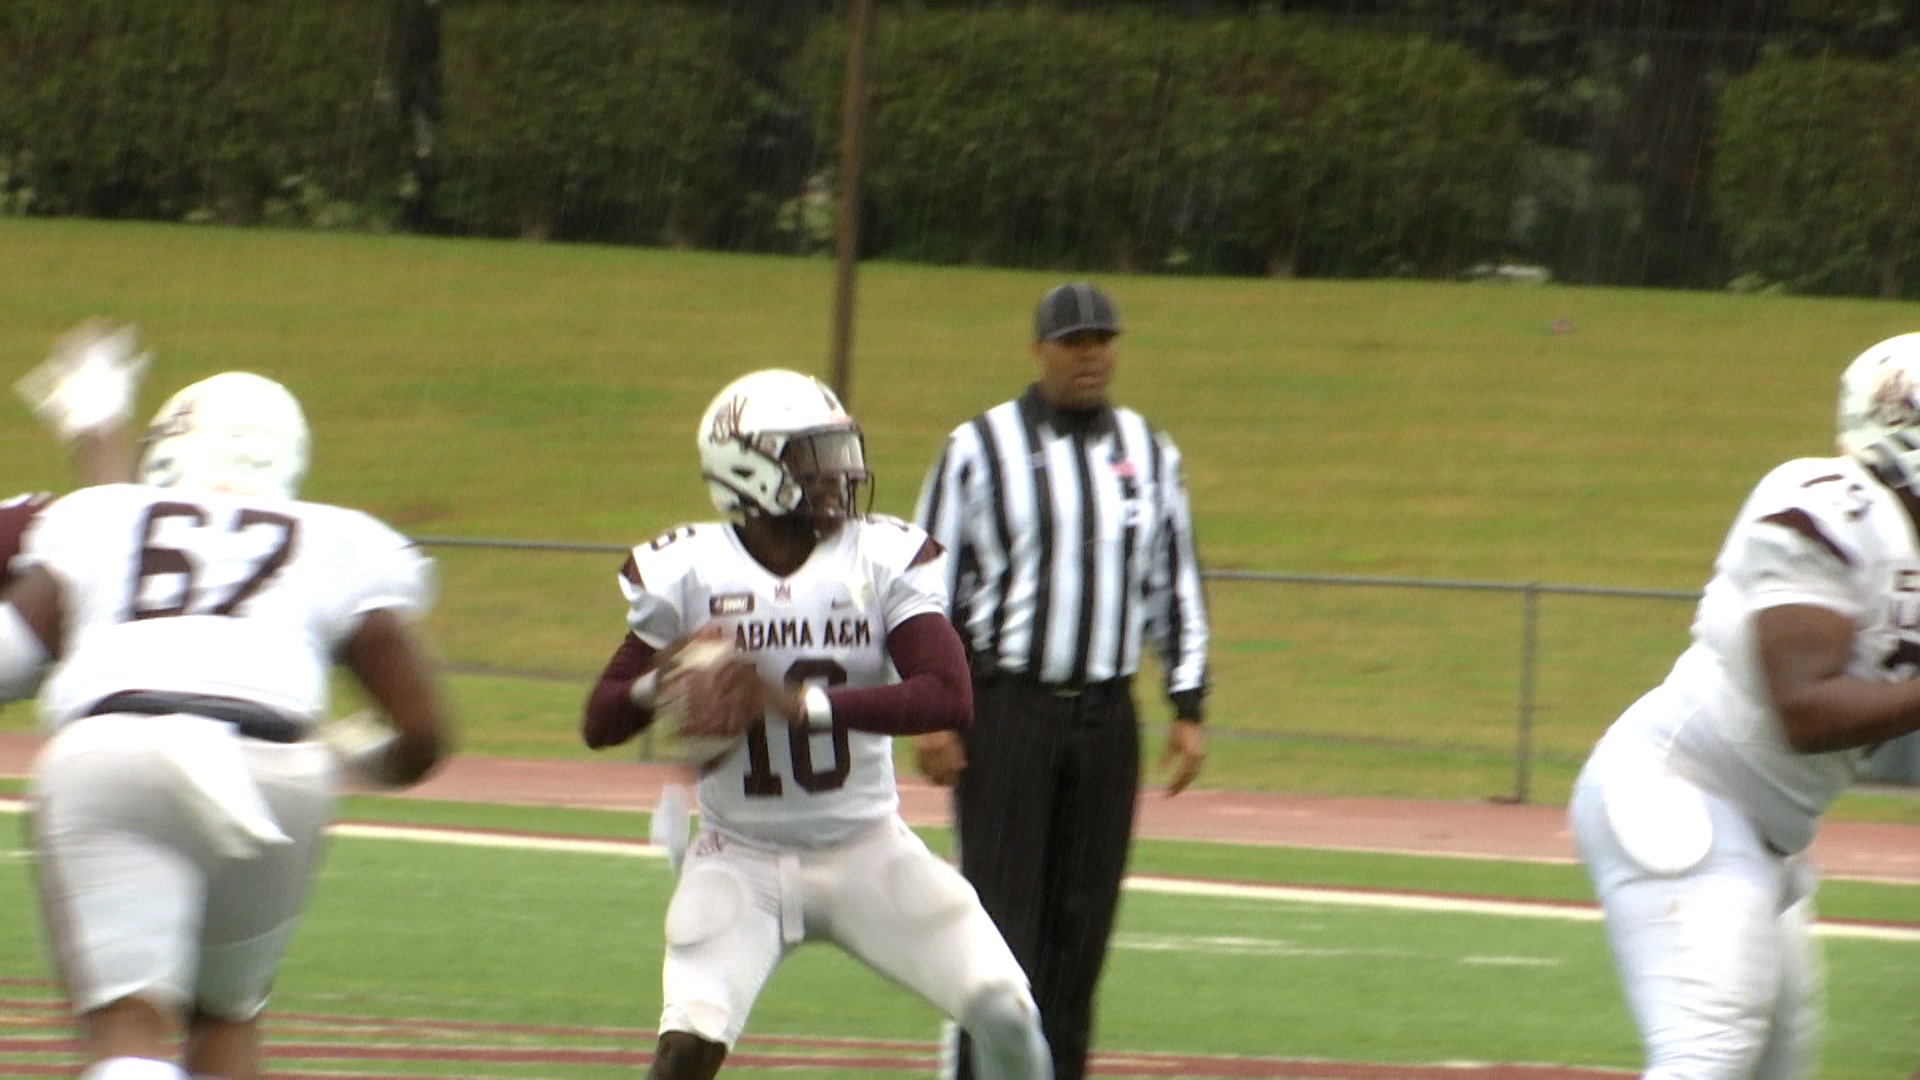 The duo of Xavier Lankford & Davaryl Moffett shined in the Alabama A&M spring football game on Saturday, leading the white team to a 30-8 win.